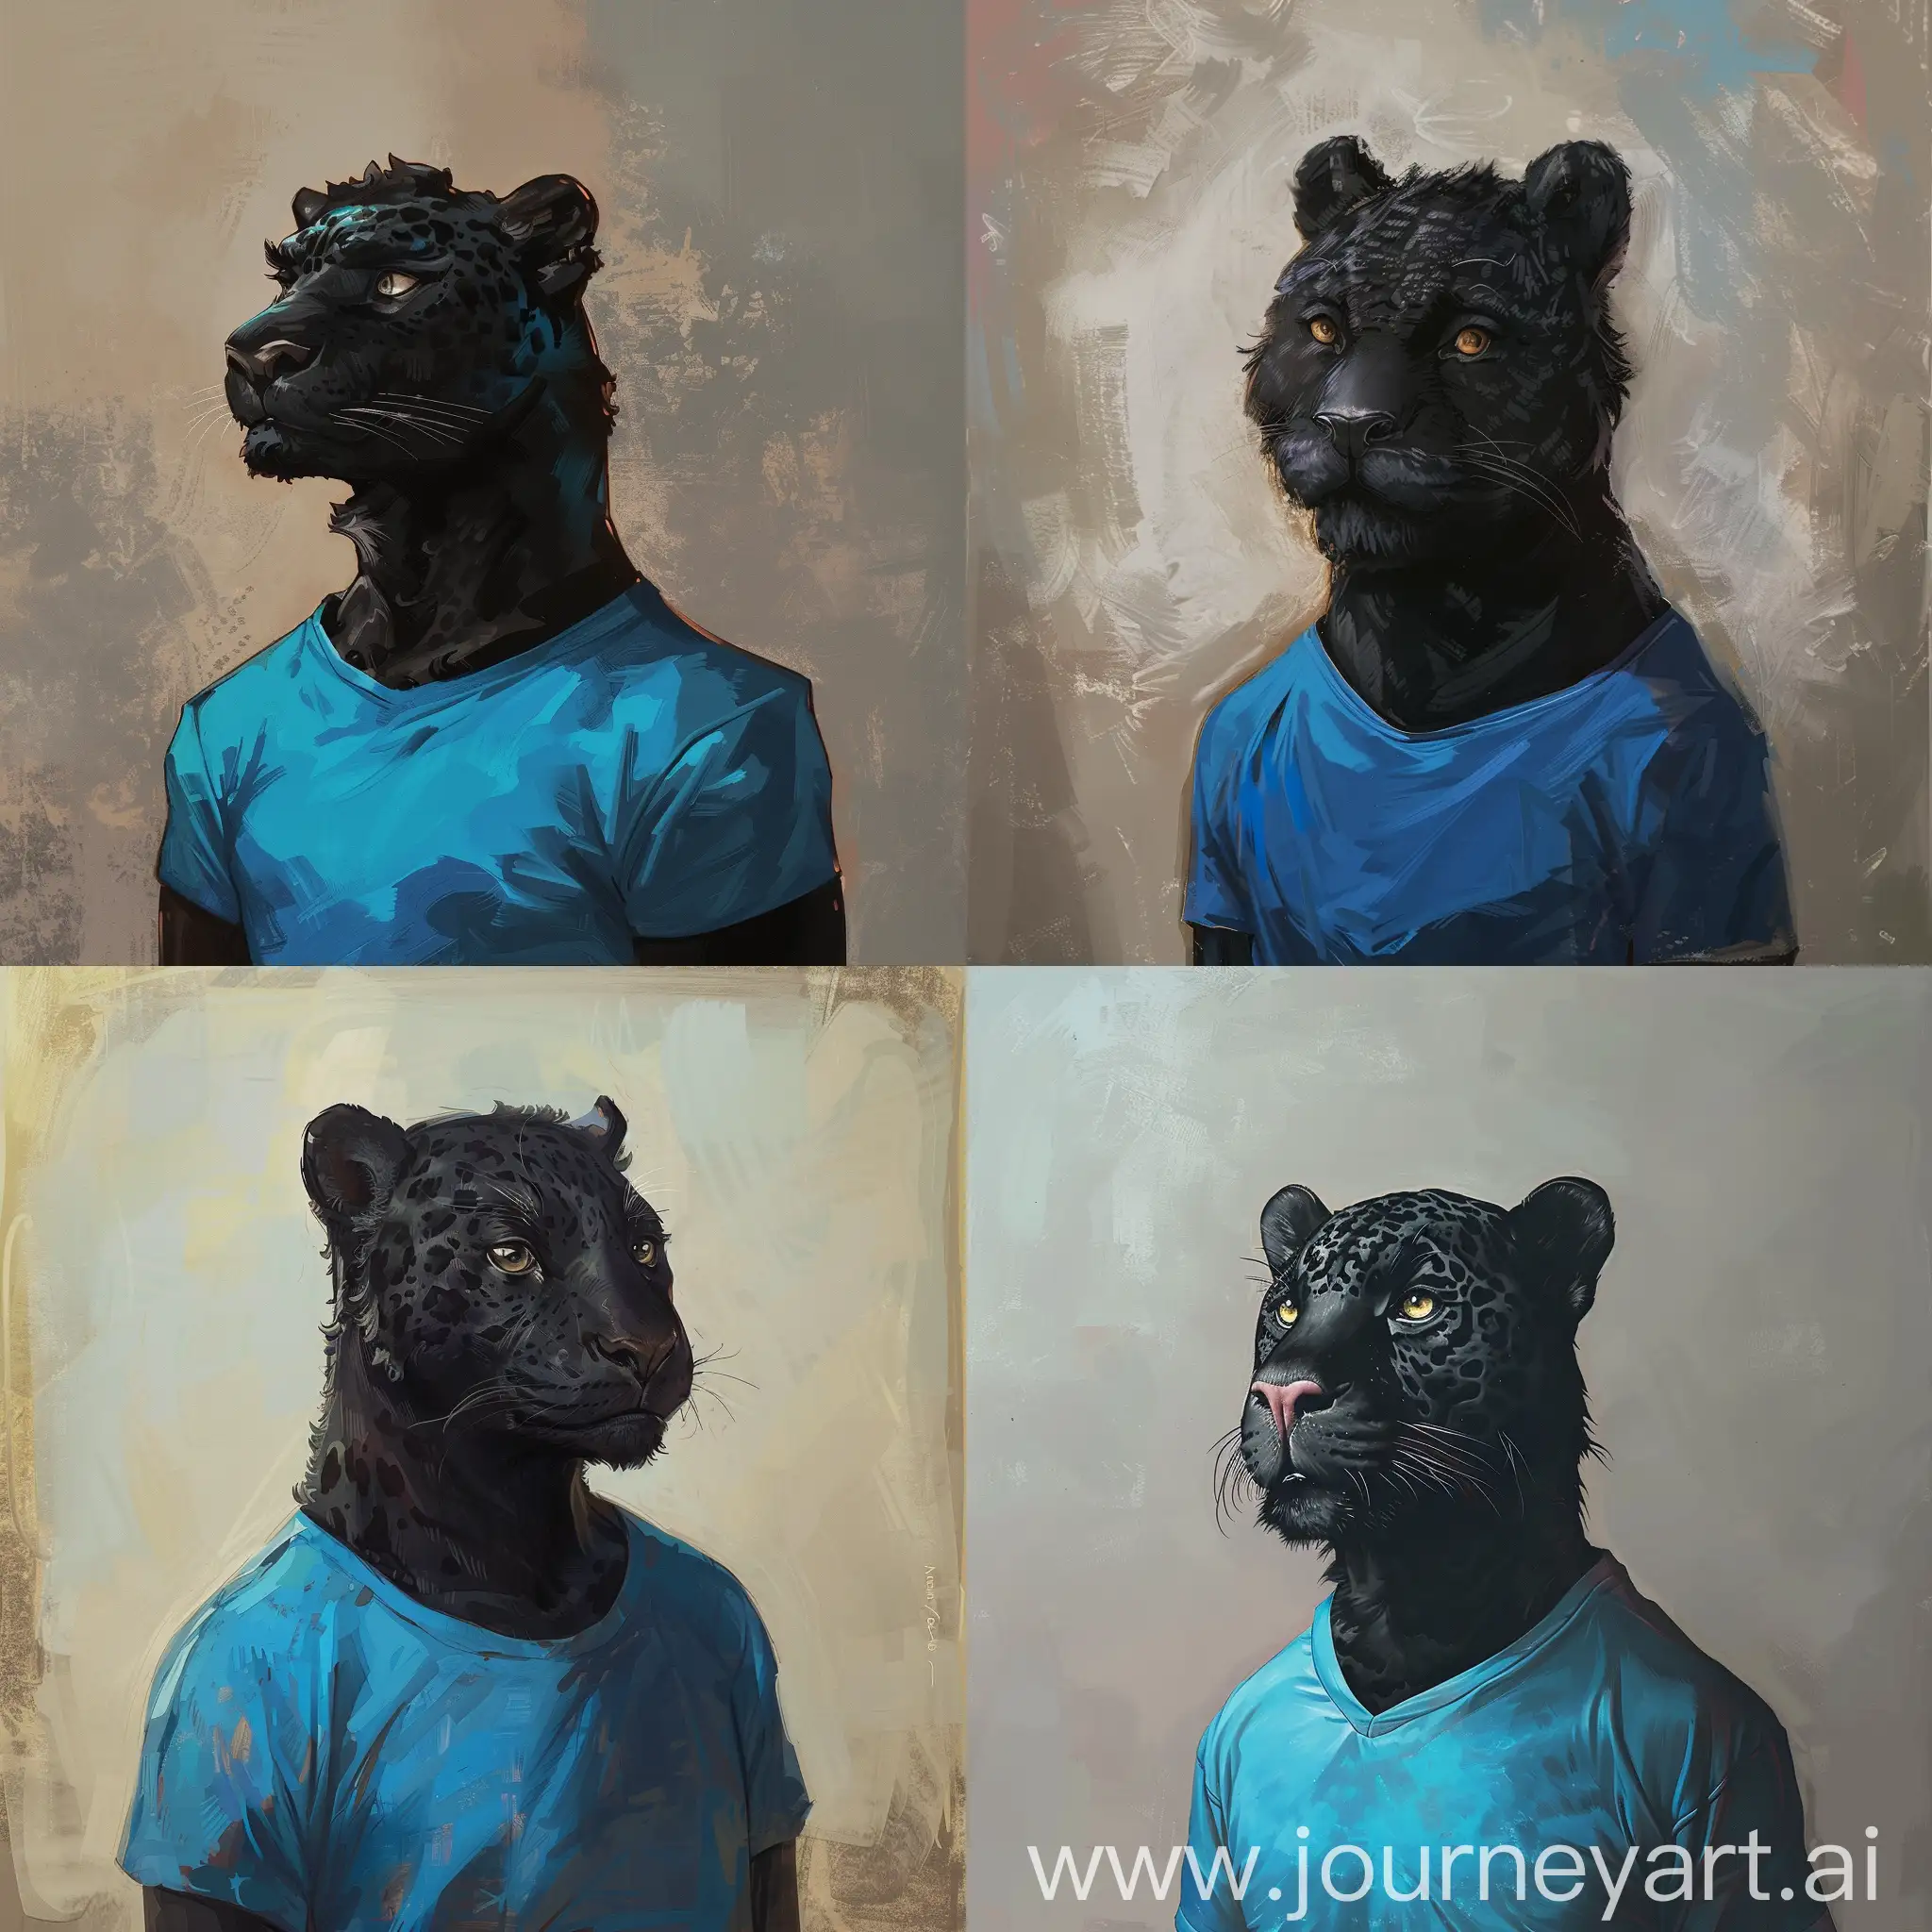 Enoch bolles art style of  , black jaguar as a suave human man, dressed in a vibrant blue  t-shirt , NFT profile picture, whimsical, textured brushwork, gentle facial expression, front view